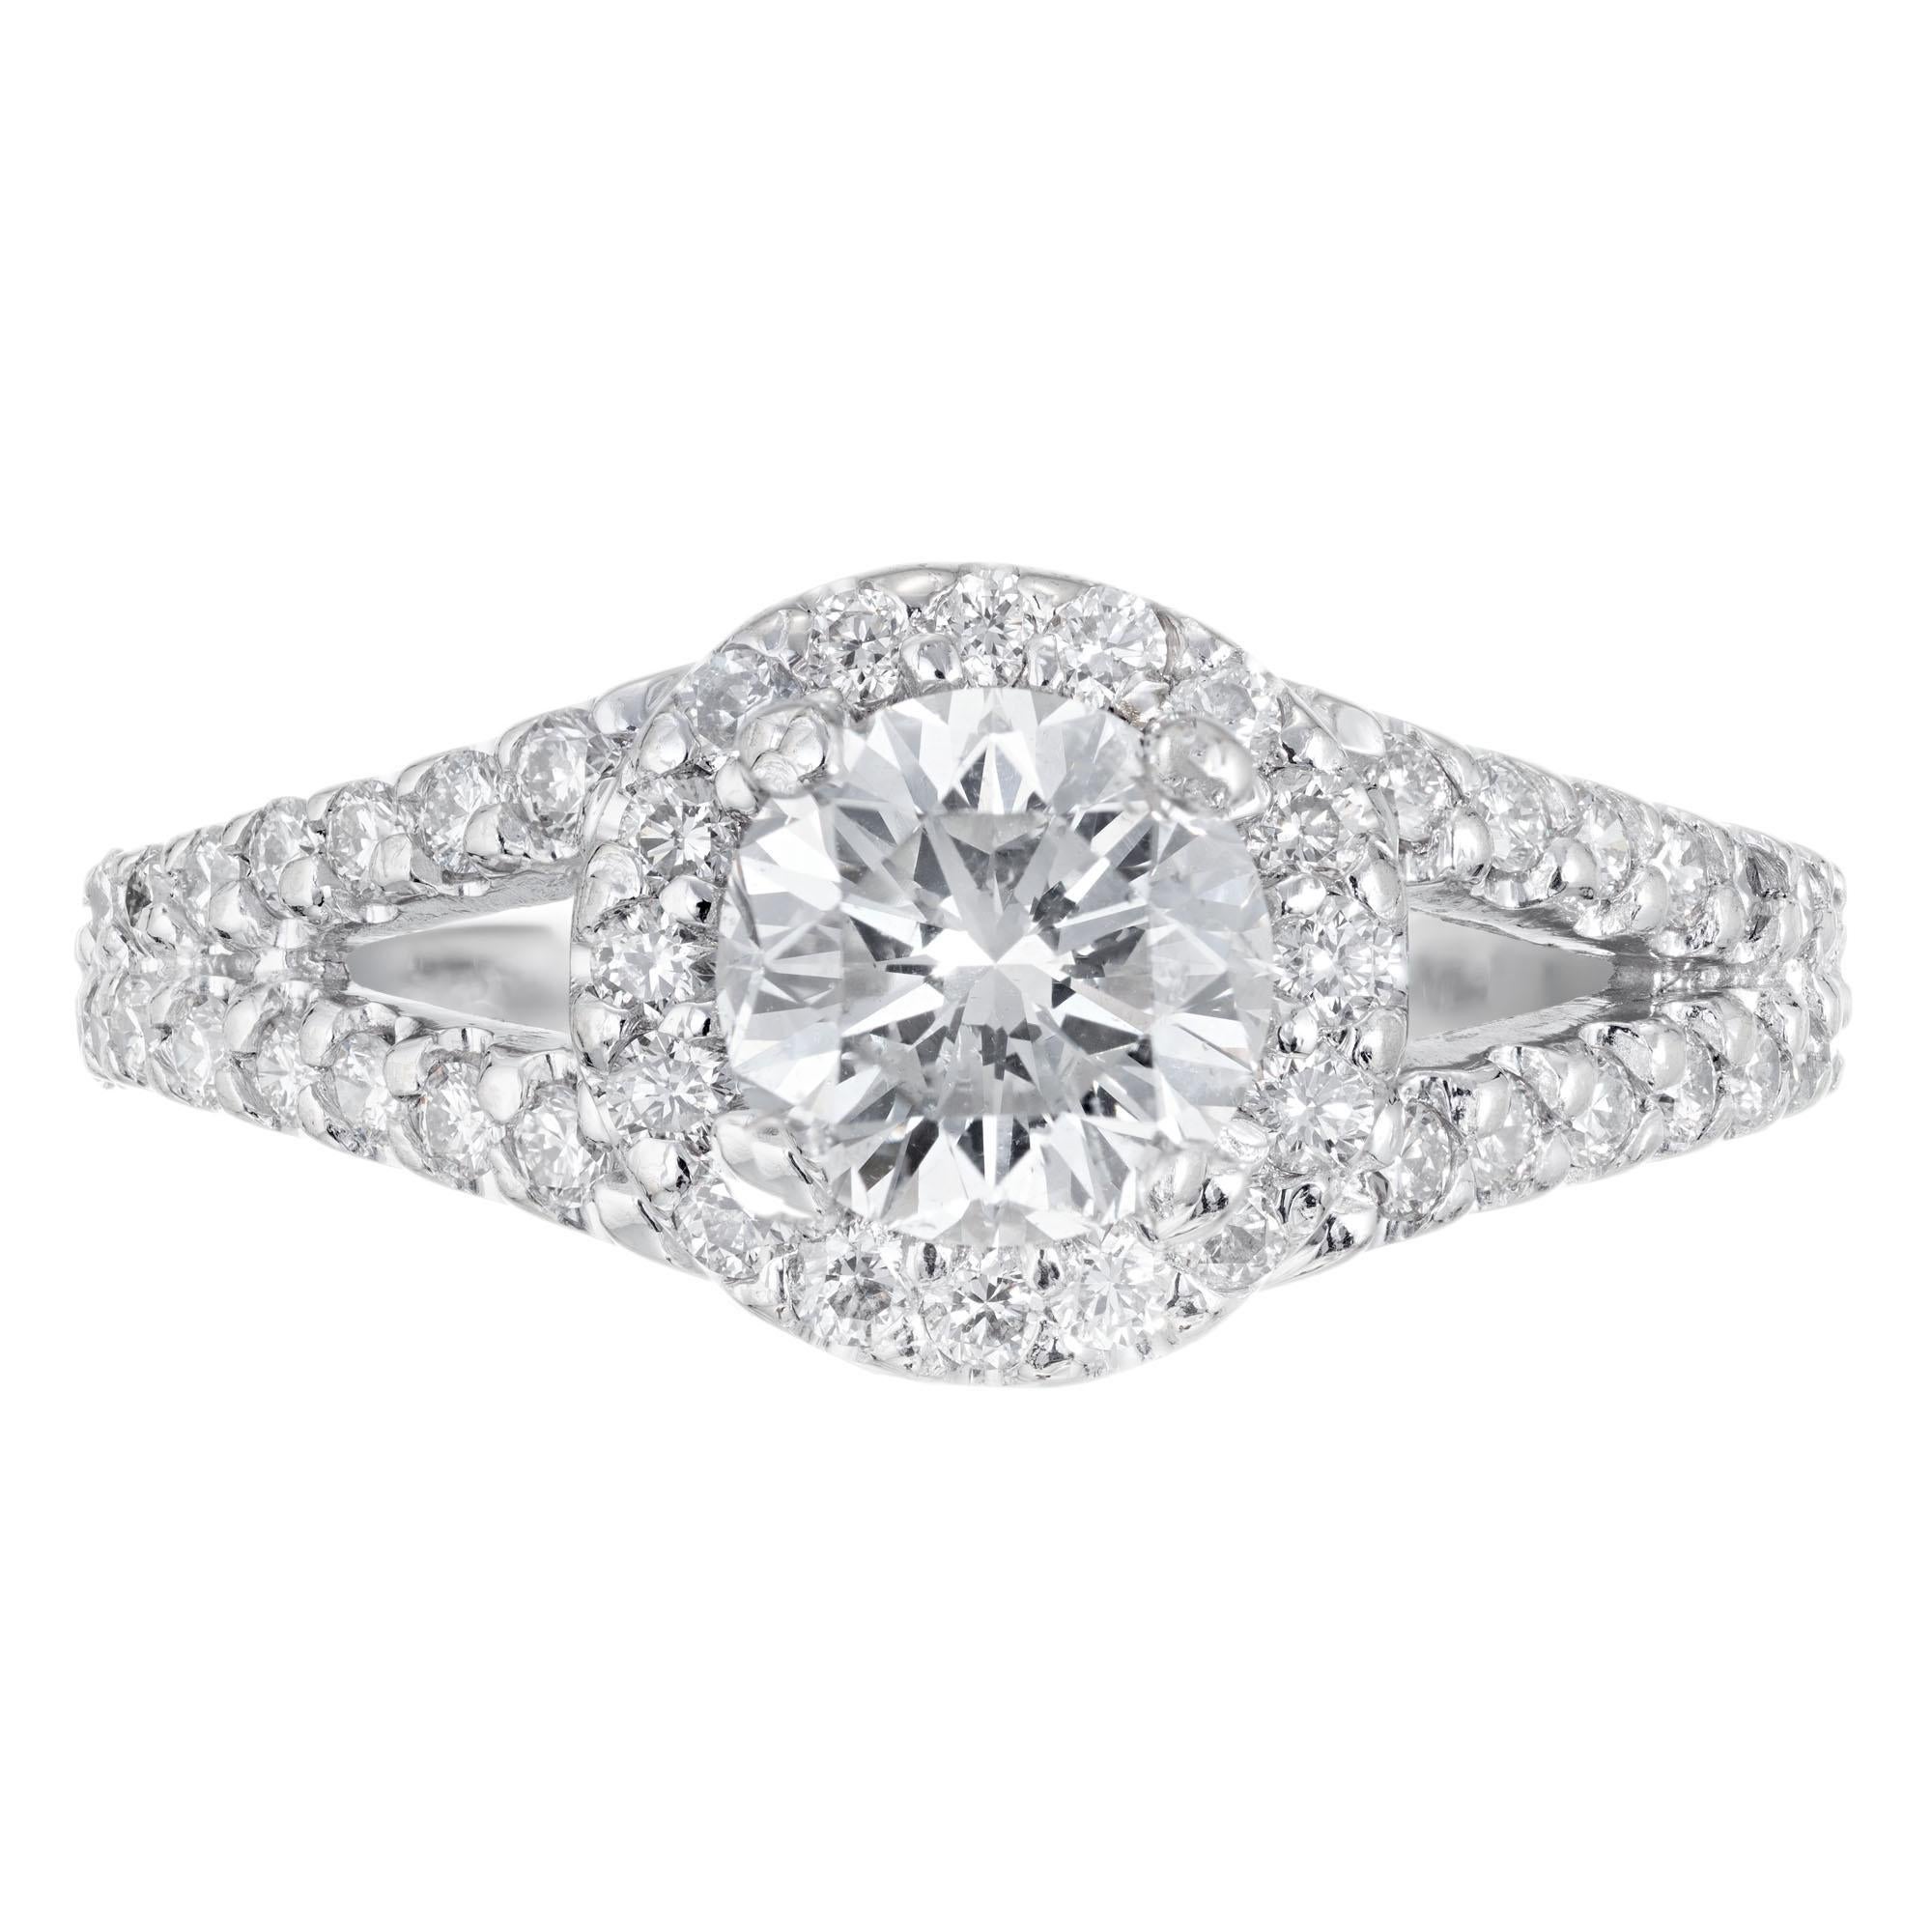 Diamond split shank engagement ring. EGL certified round center stone set in a 14k white gold Halo setting with 52 round accent diamonds.   

1 round diamond G-H SI2, approx. 1.02cts EGL Certificate # US312297802D
52 round diamonds H SI, approx.